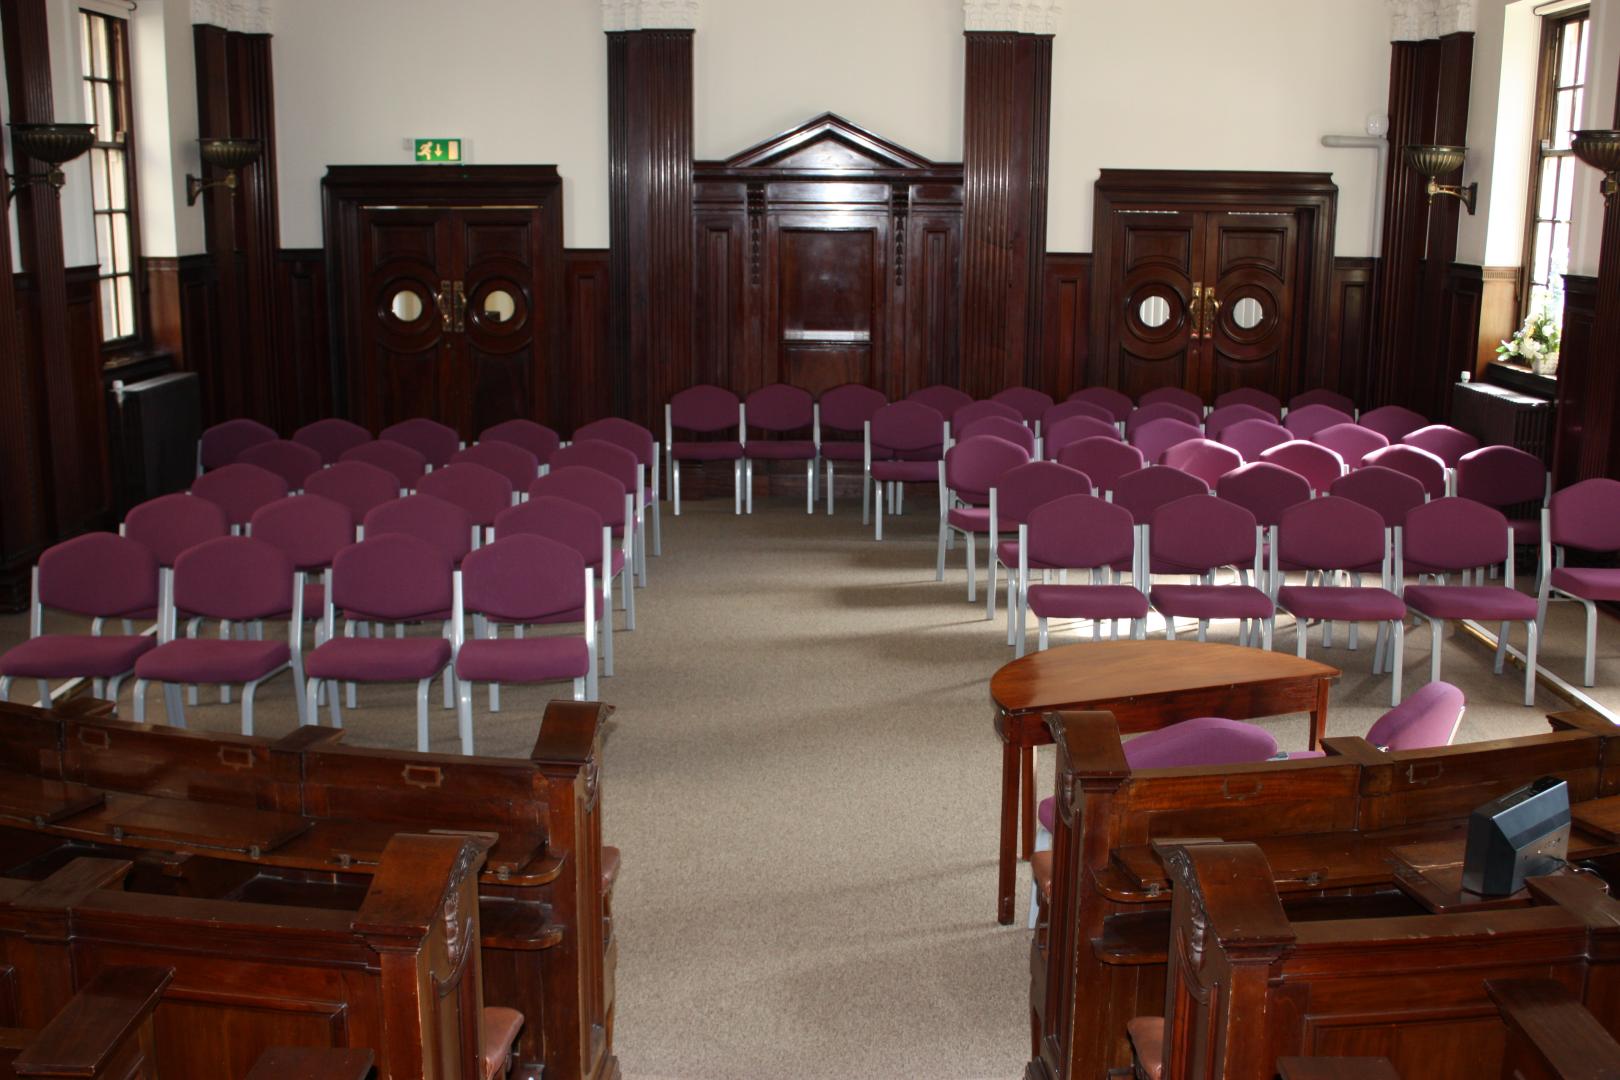 An overview of an oak panelled room, with wooden pews left and right, and pink office chairs lined up on the other side.